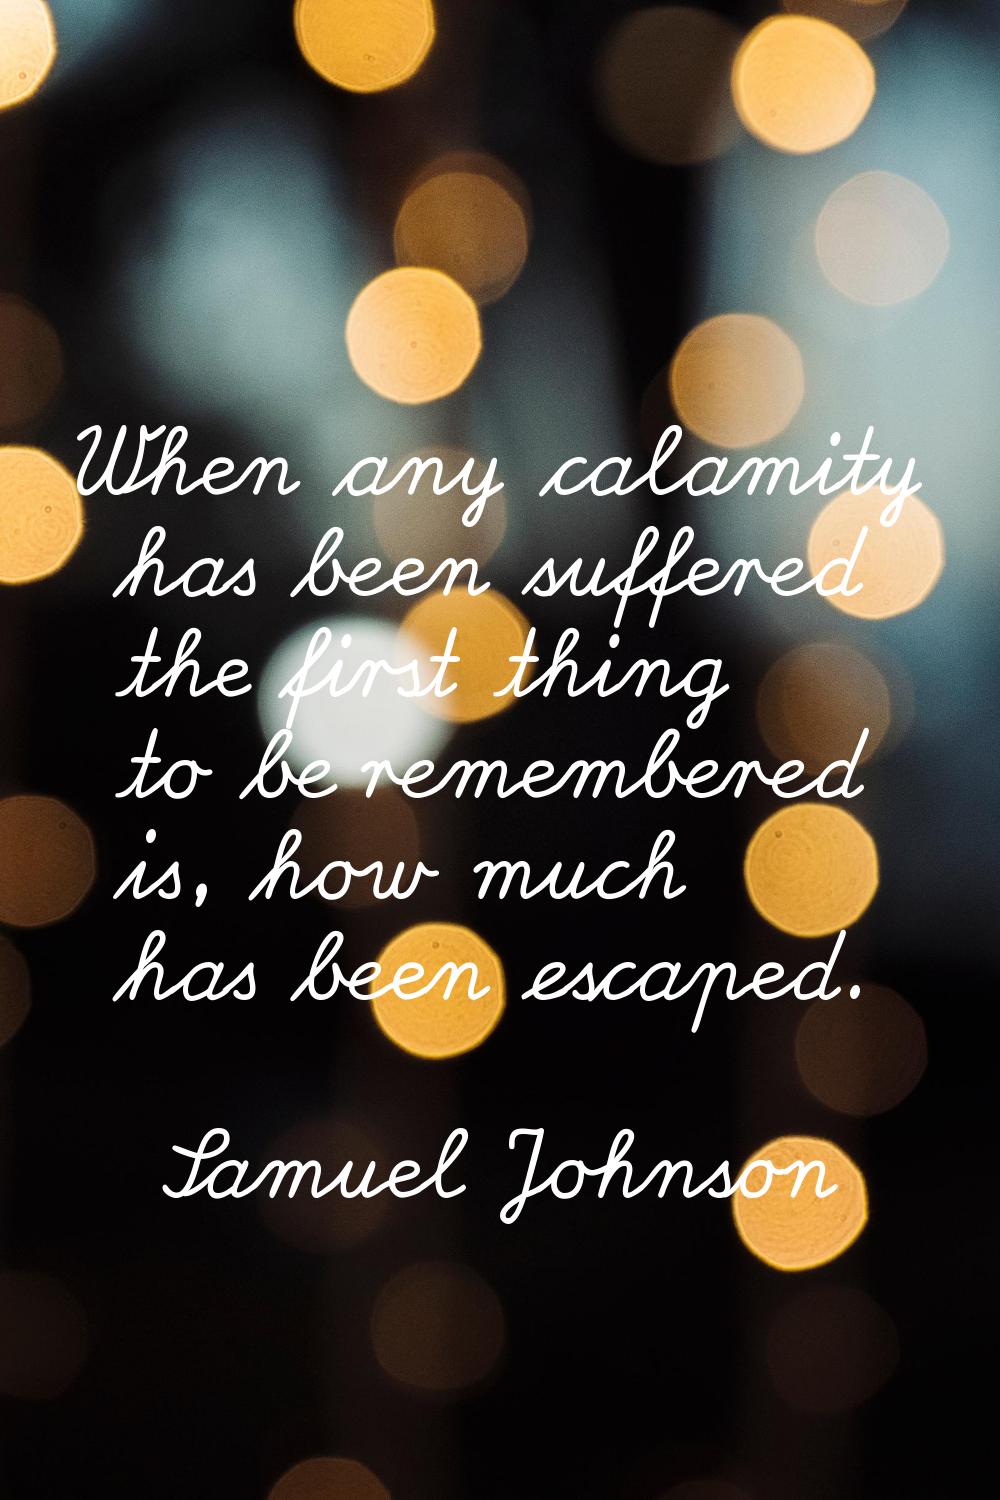 When any calamity has been suffered the first thing to be remembered is, how much has been escaped.